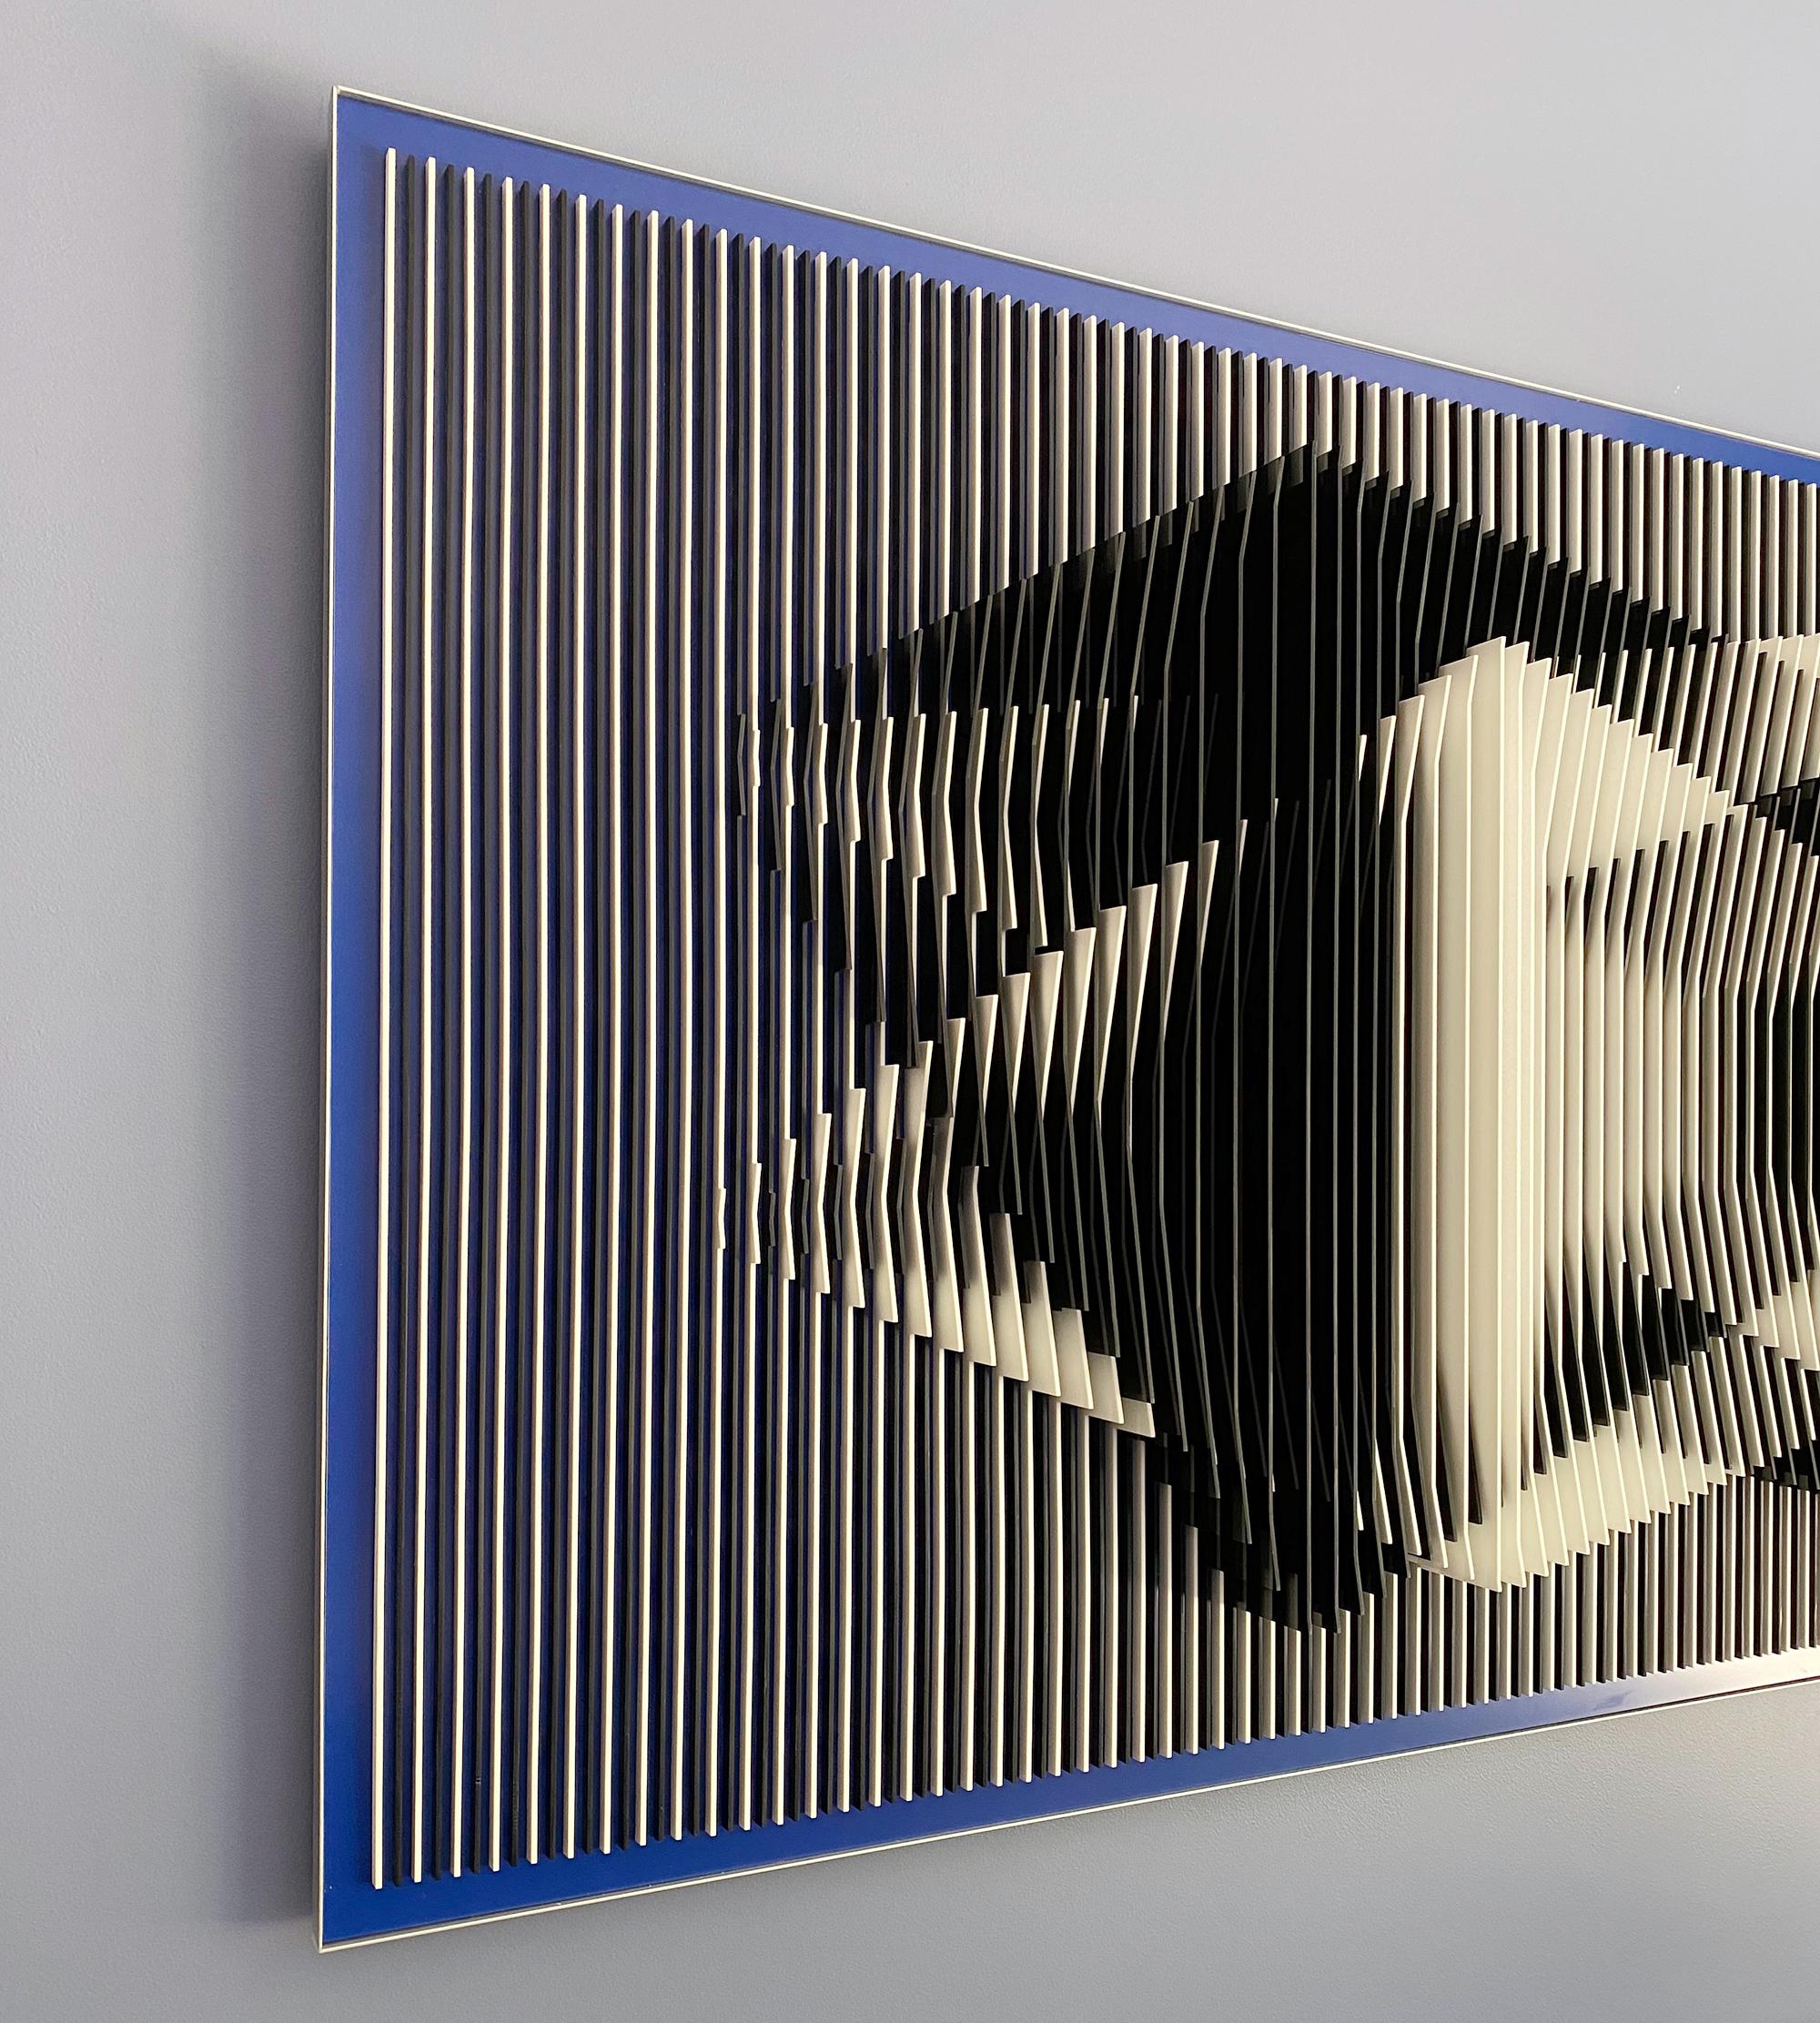 'Dual Perspectives', Abstract, Geometric, Kinetic Wall Art - Sculpture by Jose Margulis